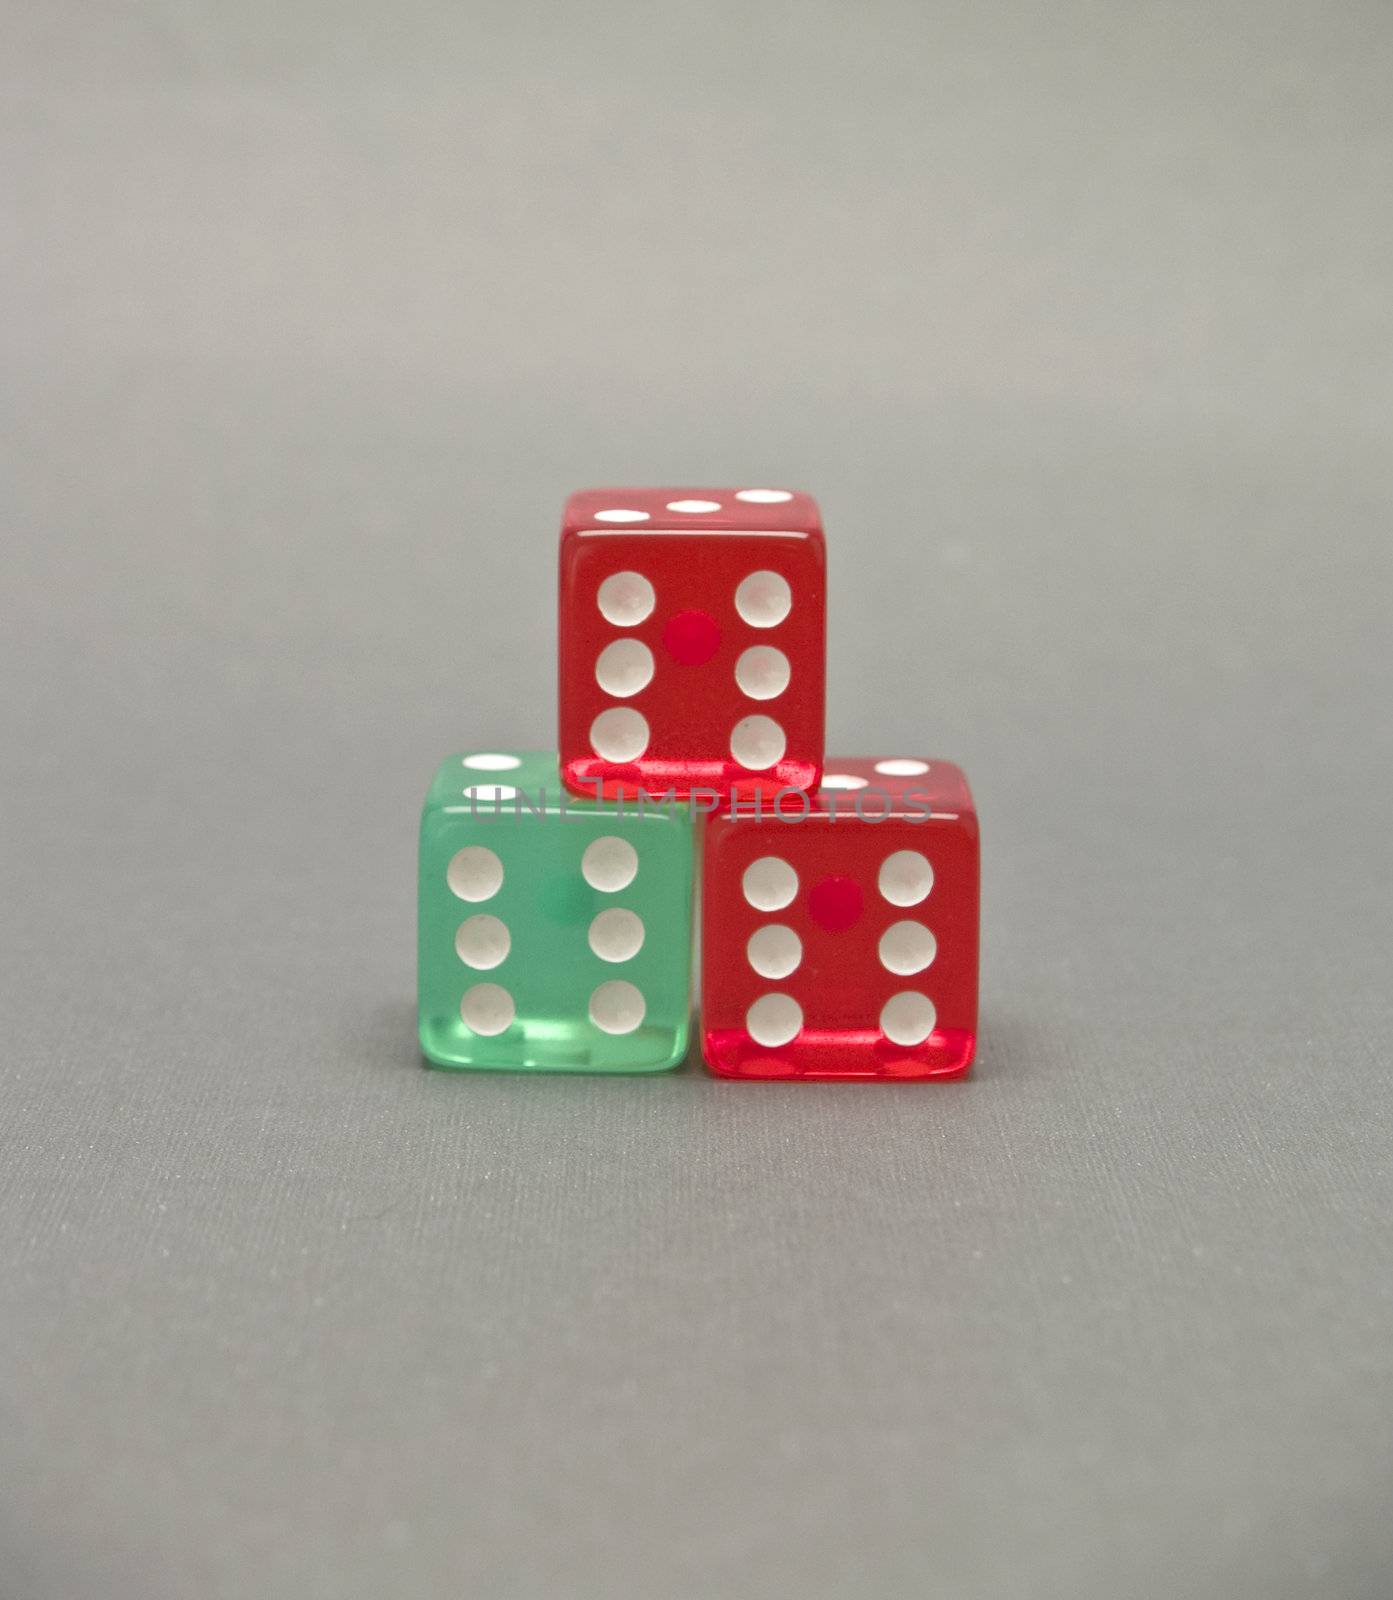  acrylic dice by lauria